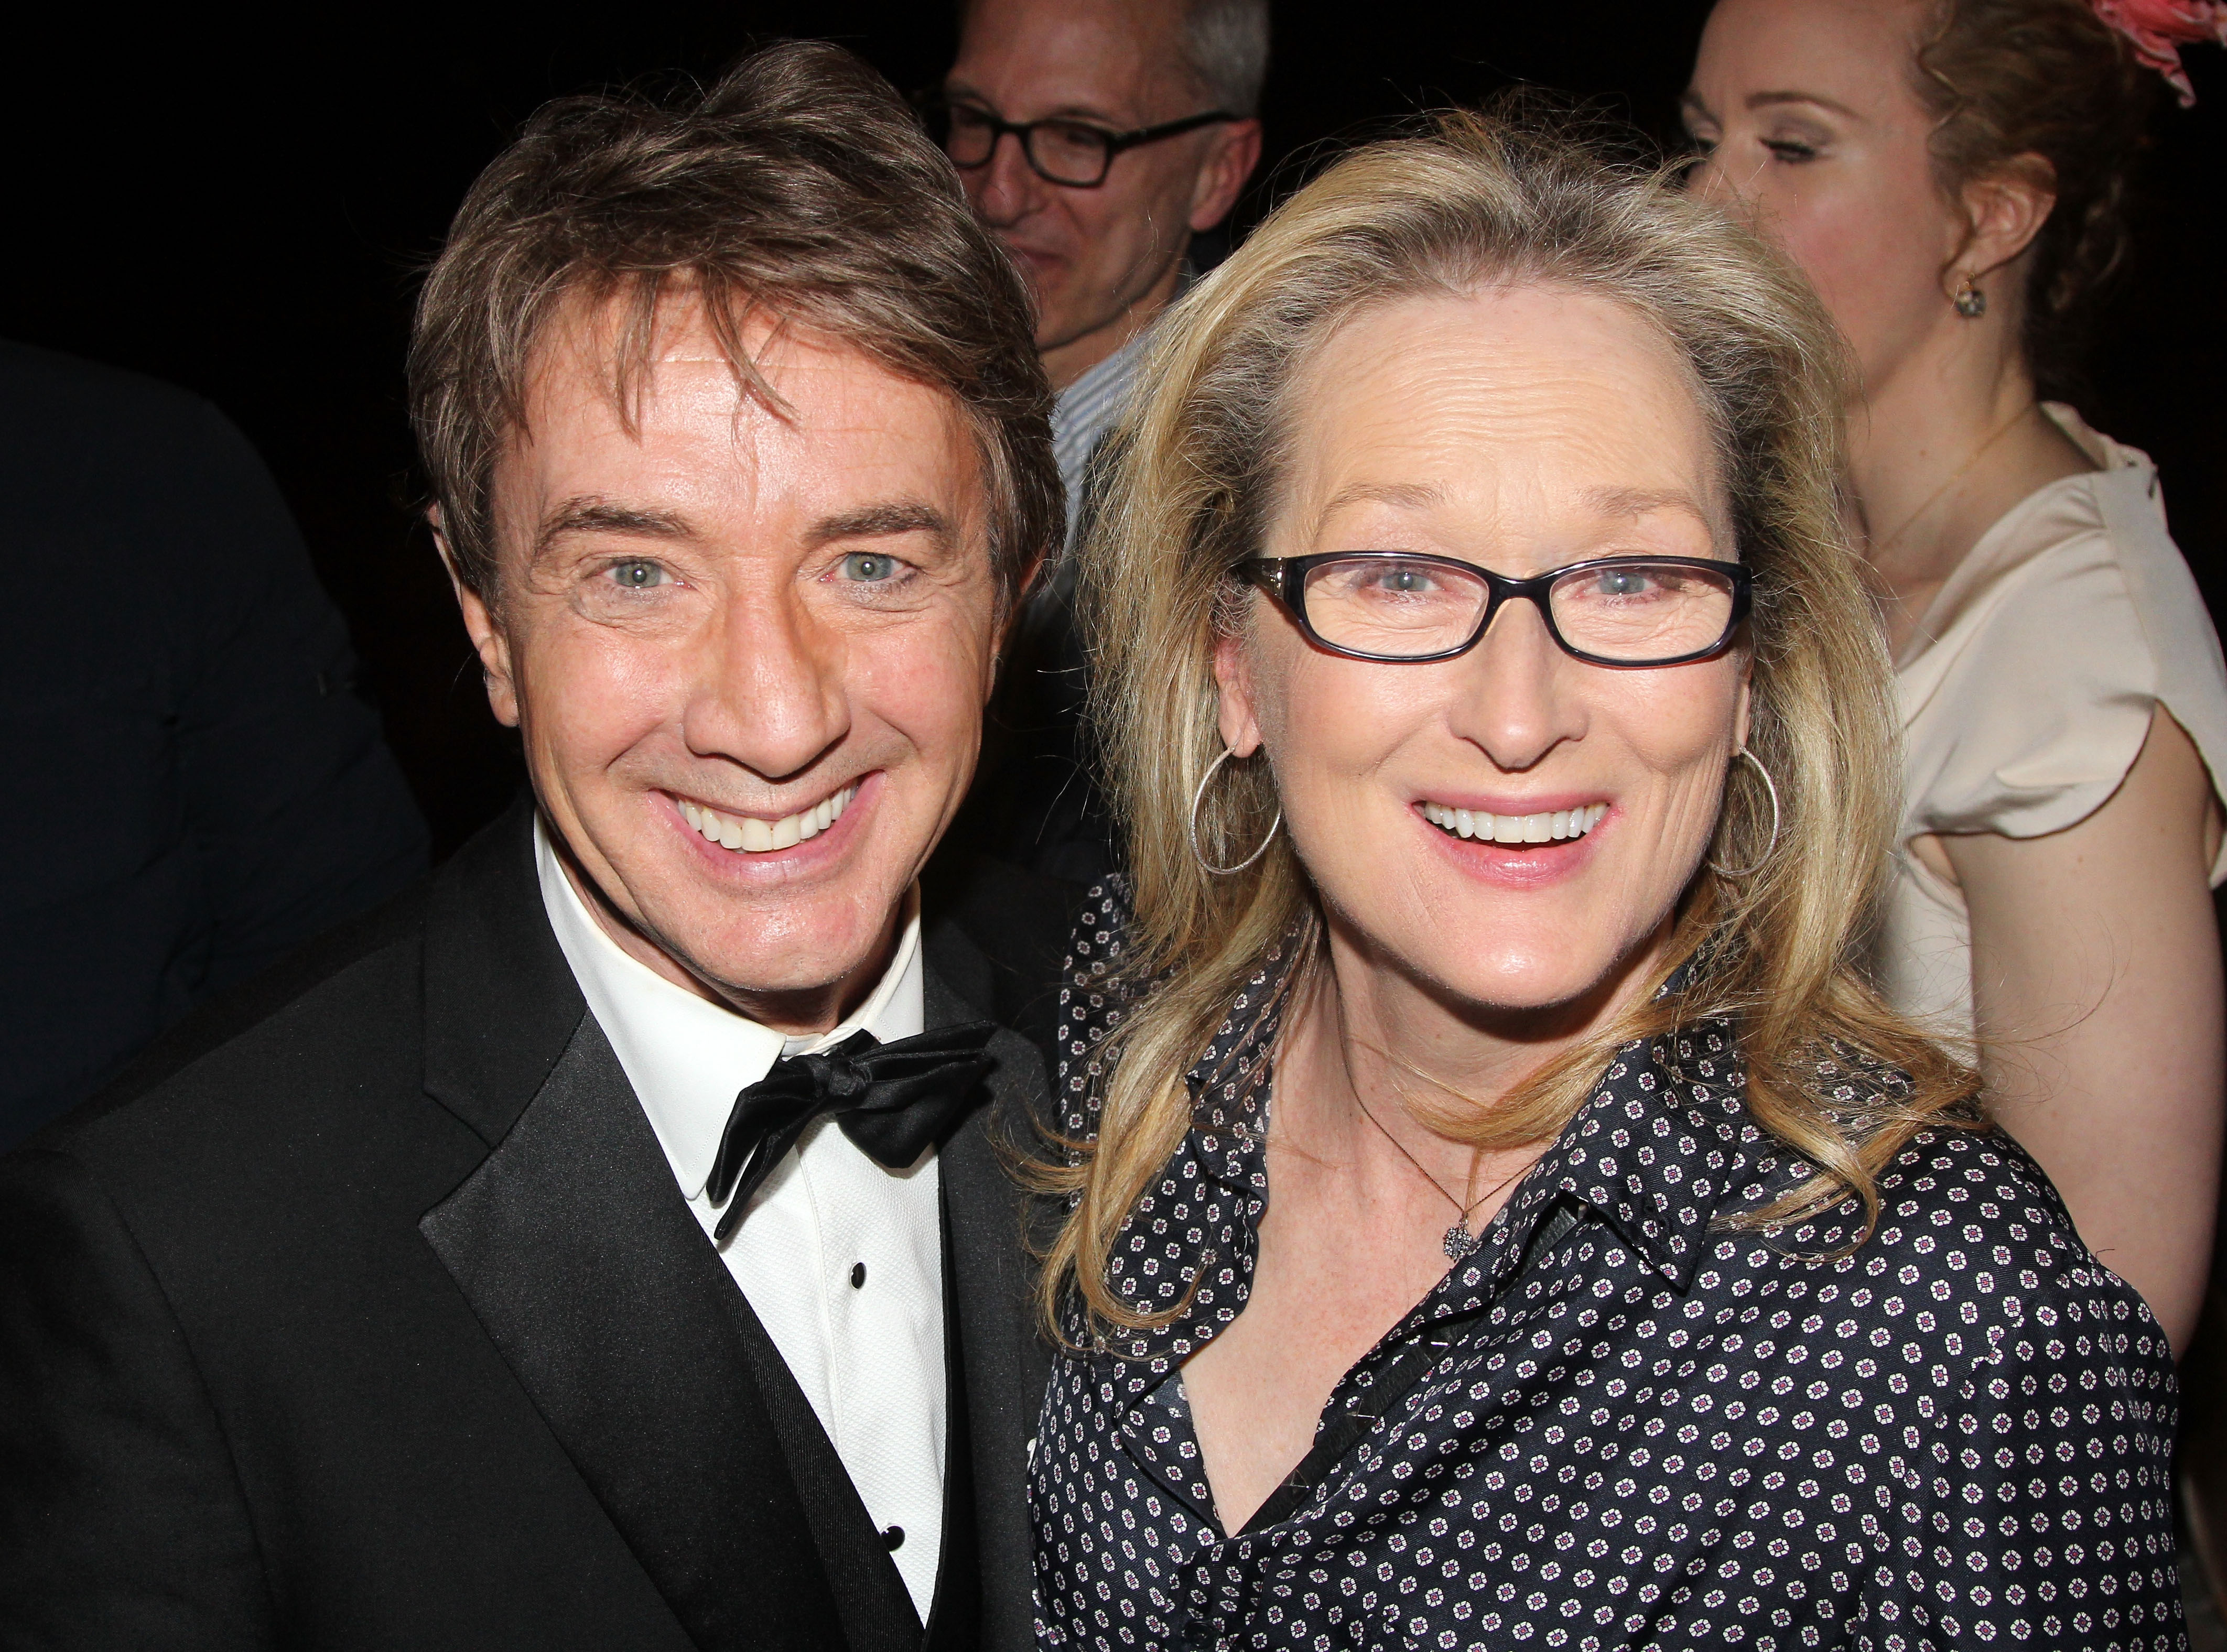 Martin Short and Meryl Streep pose backstage at the hit play "It's Only a Play" on Broadway at The Jacobs Theater in New York City, on February 3, 2015. | Source: Getty Images